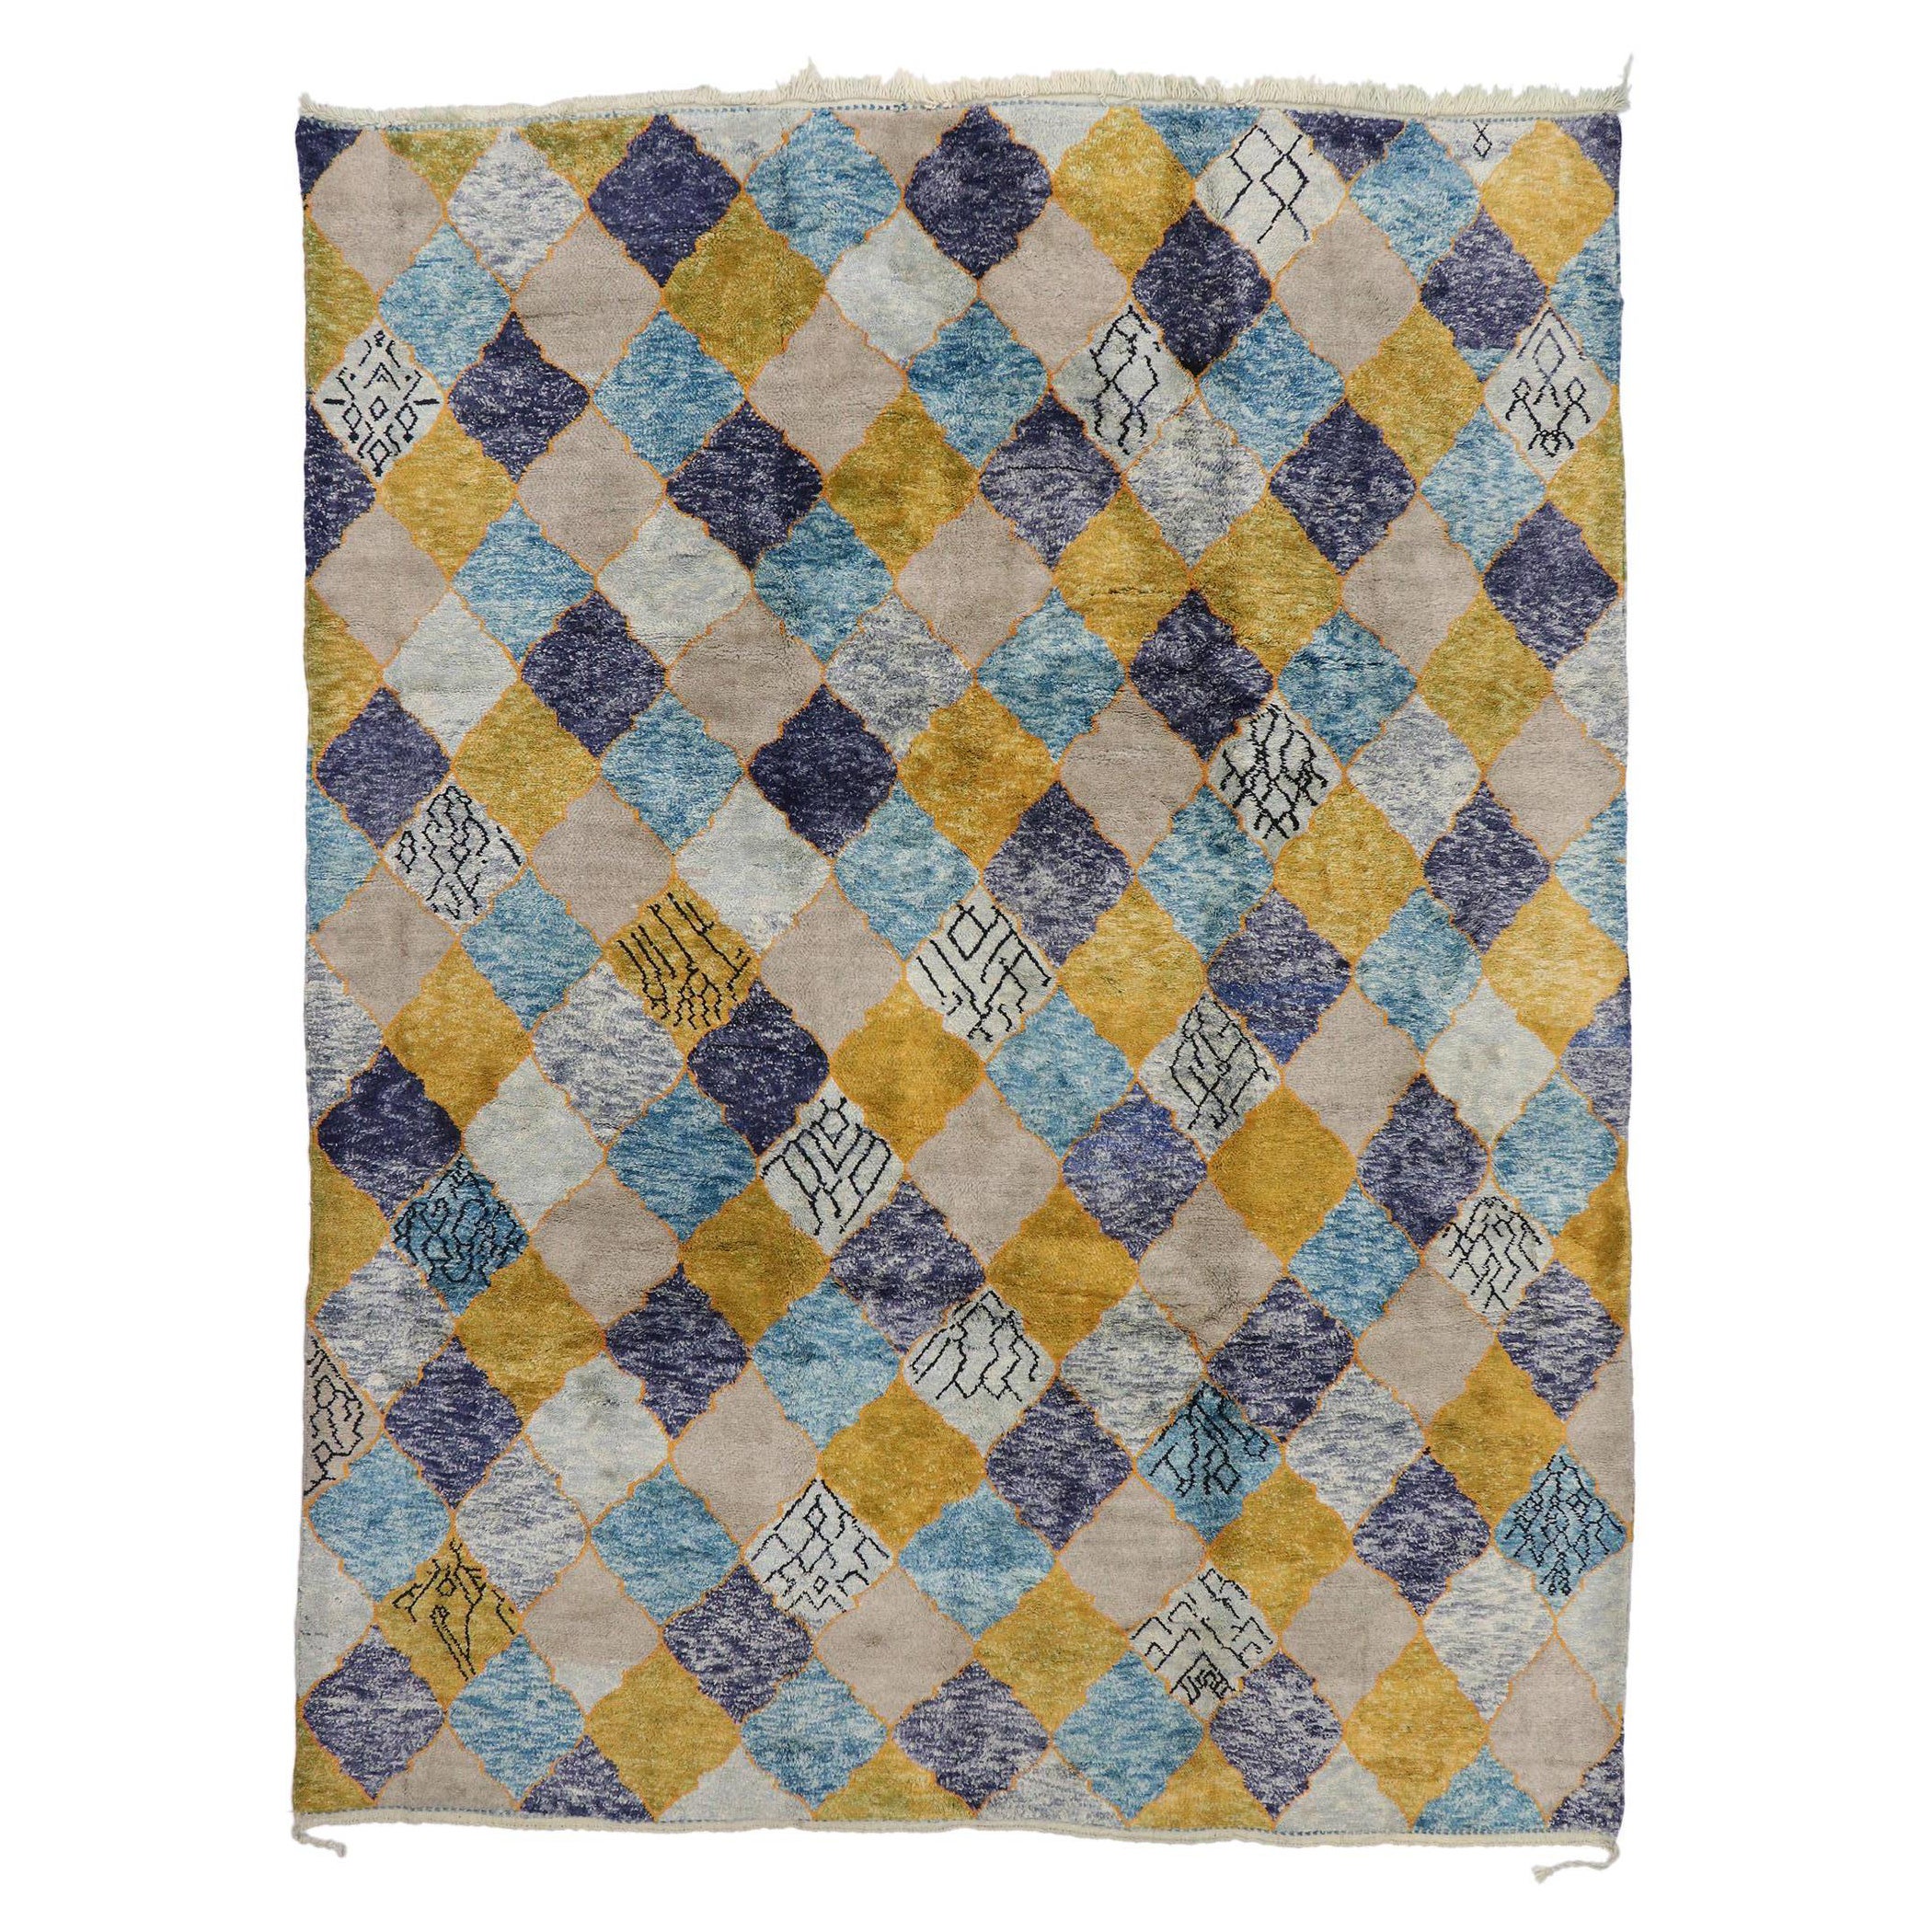 New Contemporary Berber Moroccan Rug with Preppy Boho Style